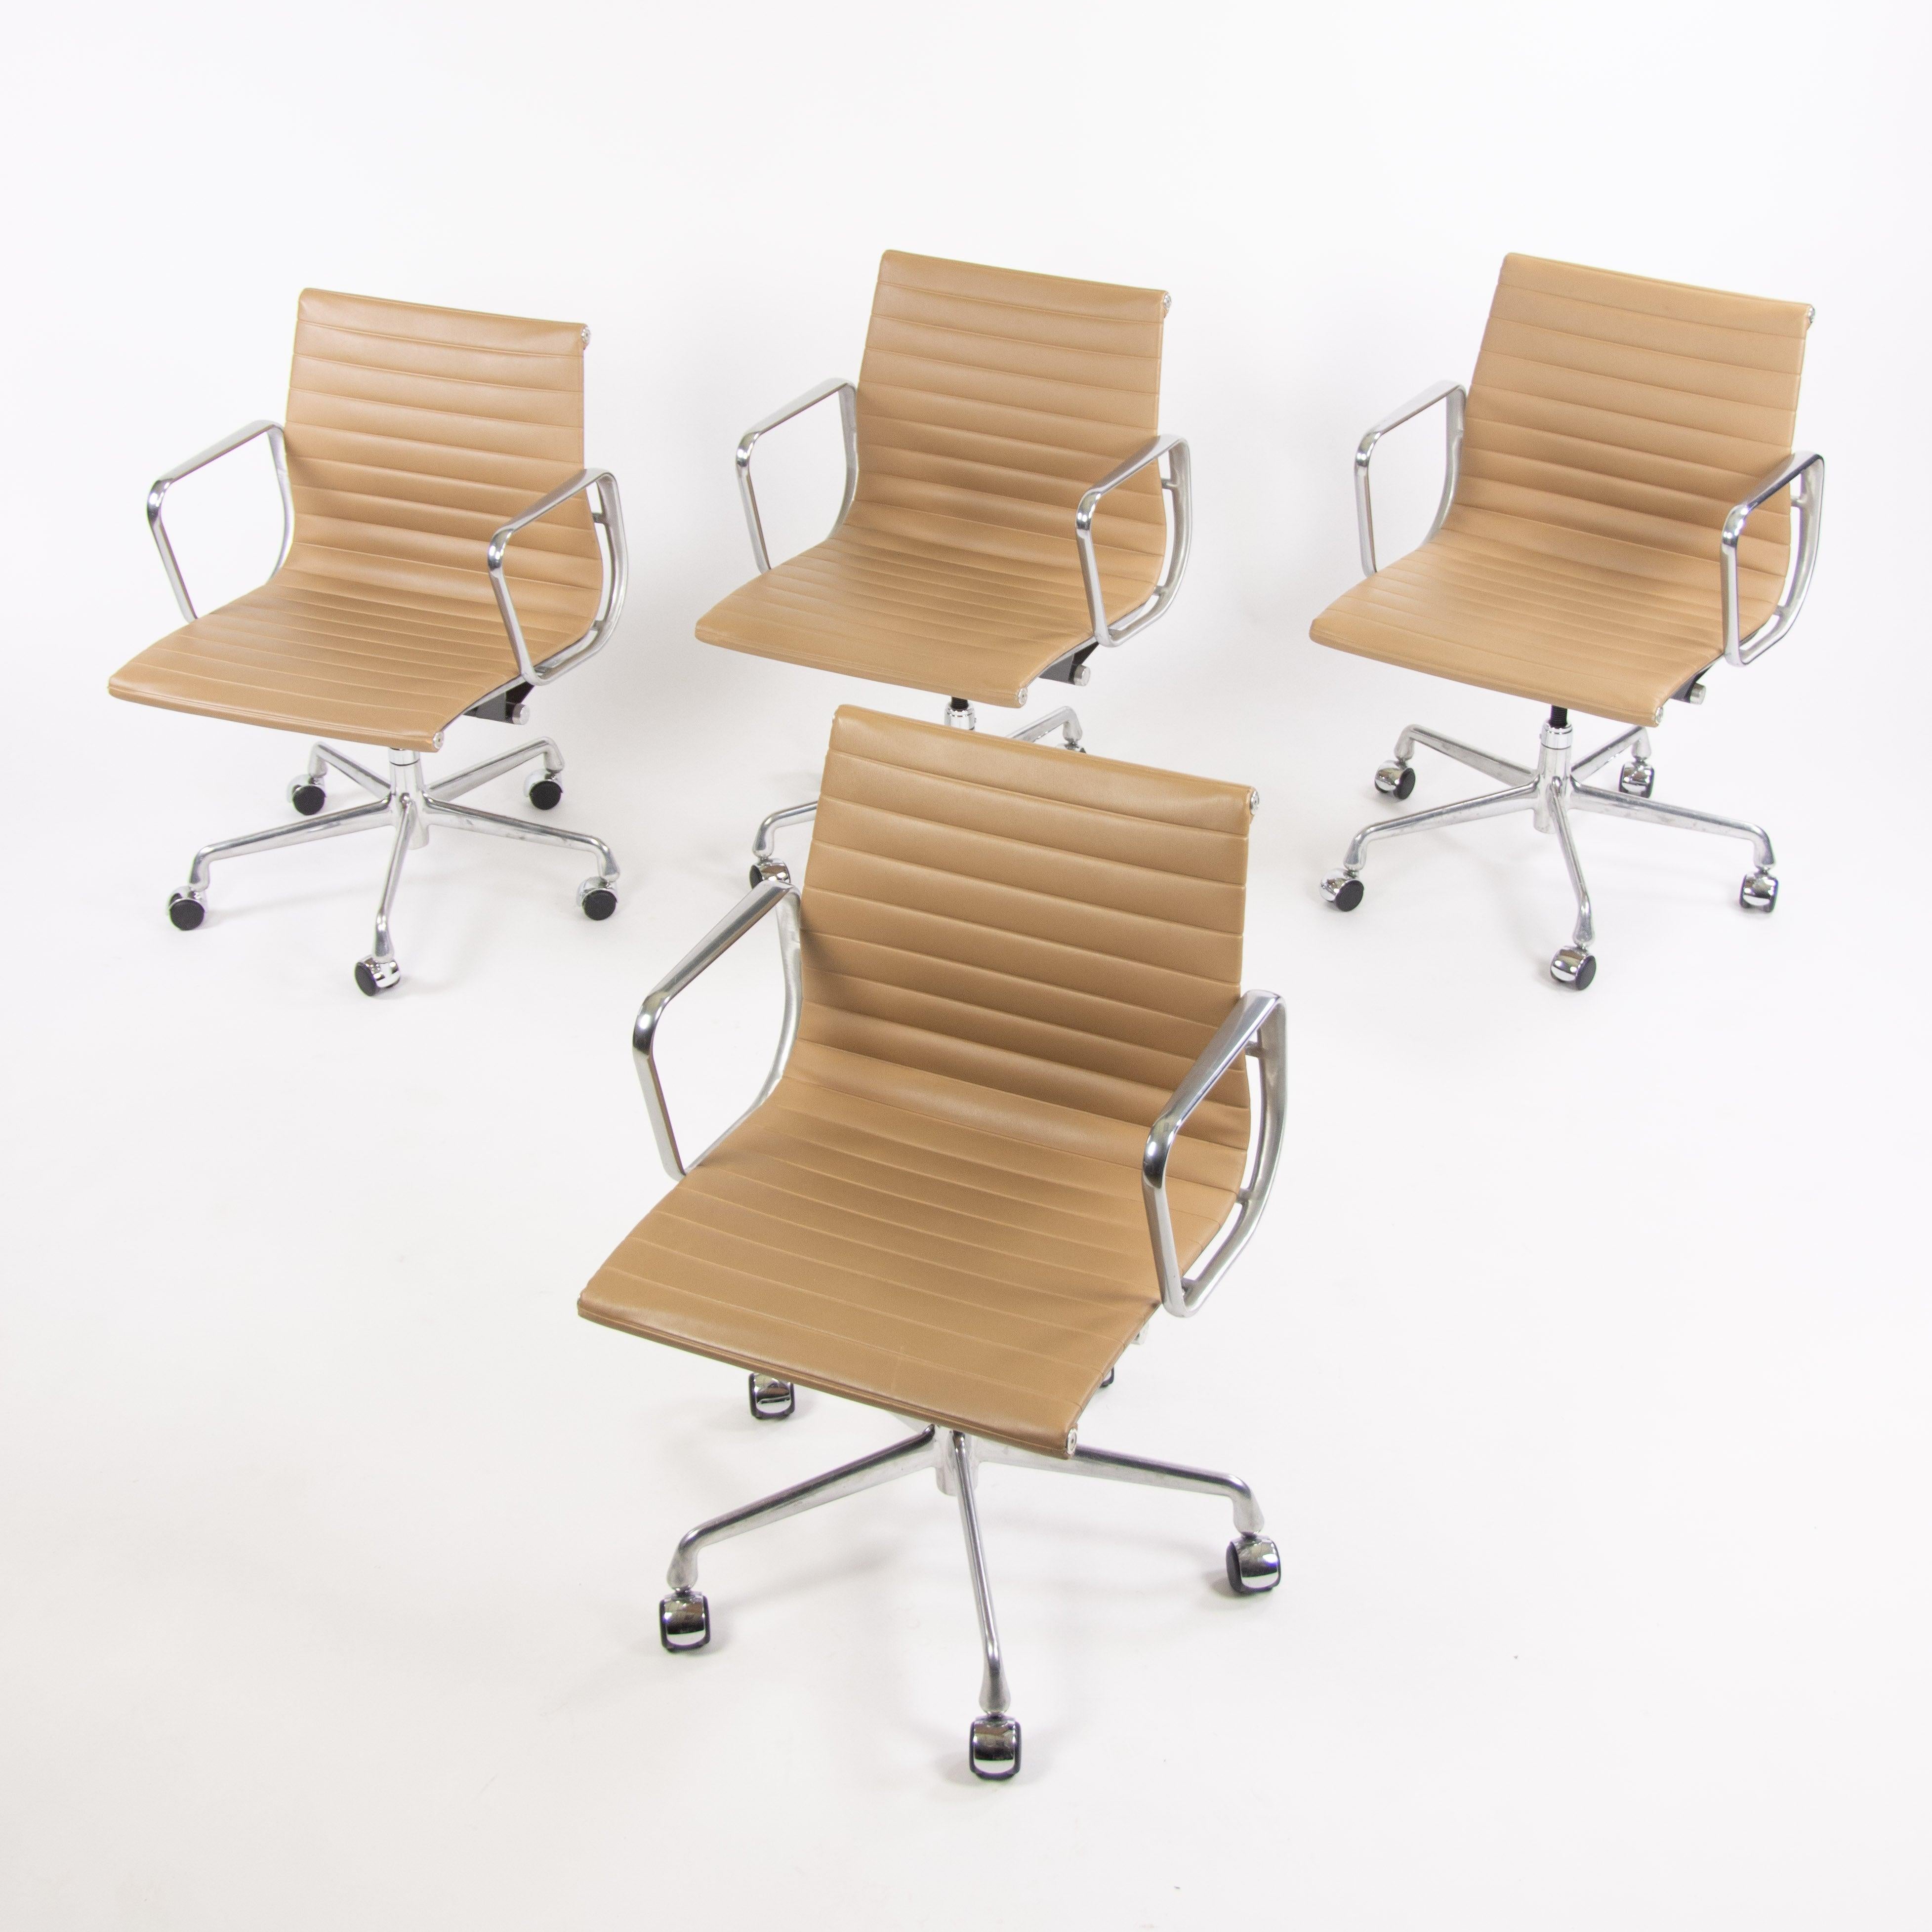 Listed for sale is a single (multiple chairs are available, but the price listed is for each chair) Herman Miller Eames aluminum group management desk chair in tan naugahyde, the favorite material of Charles Eames for these chairs. The aluminum